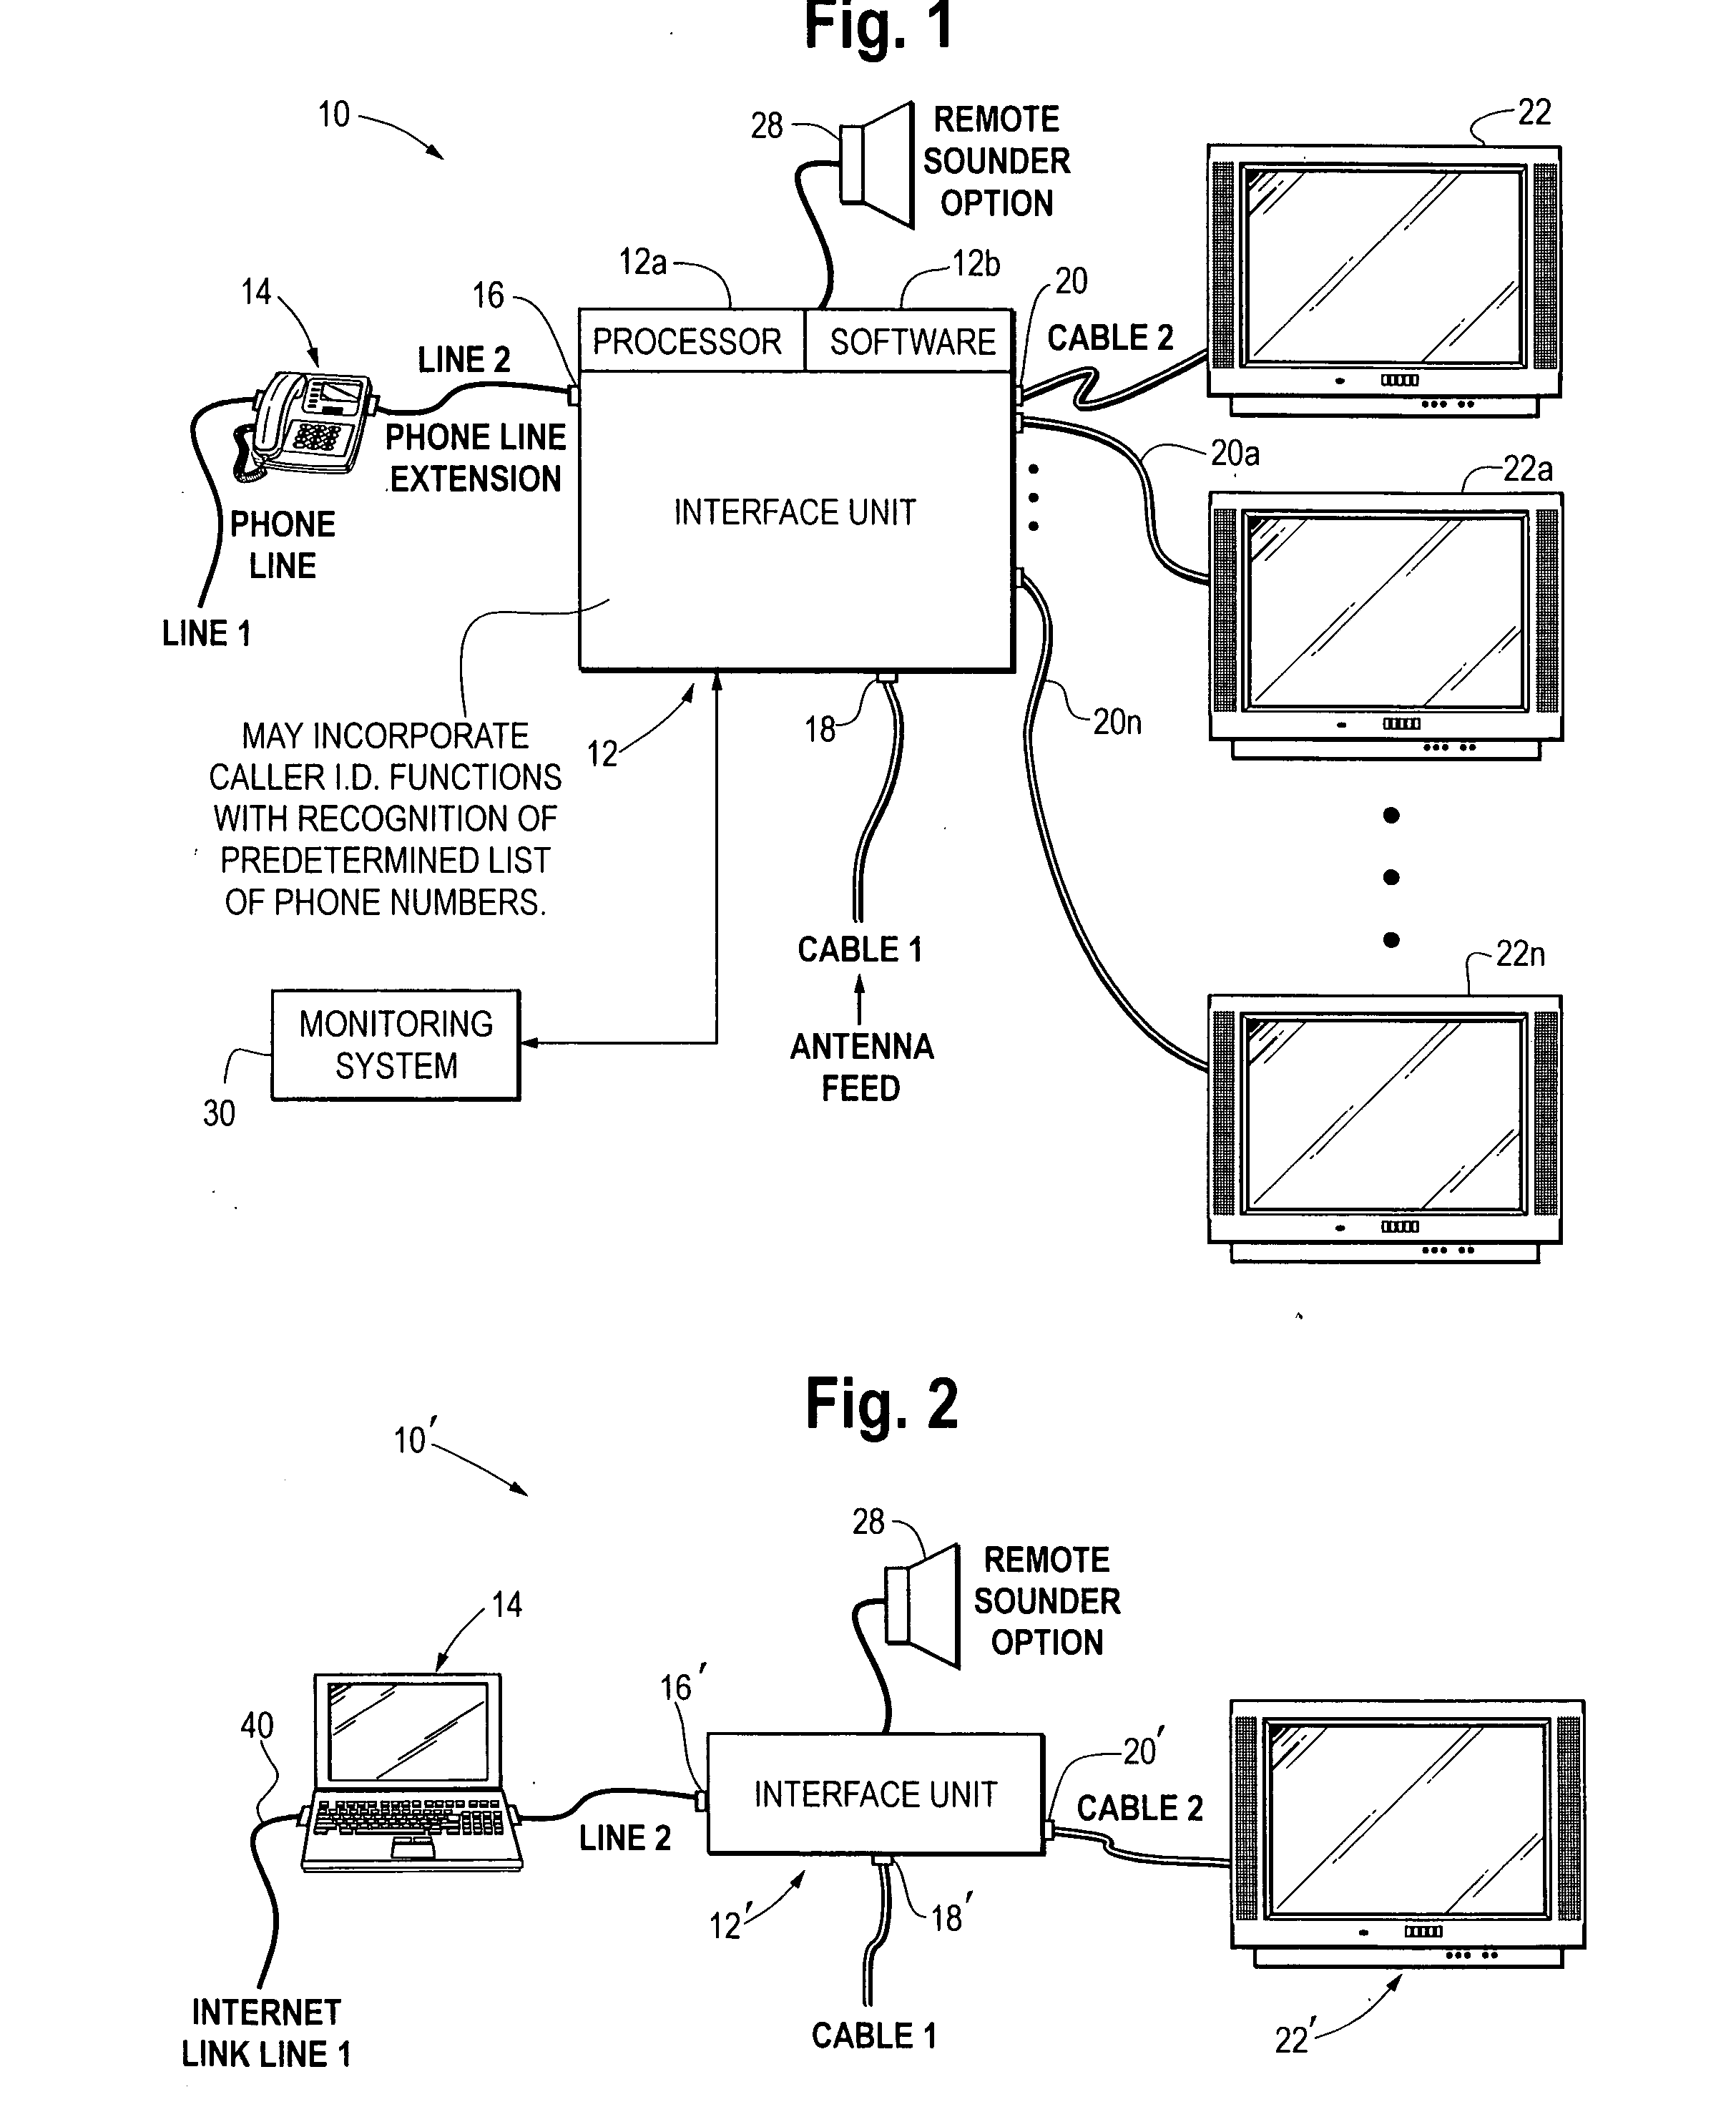 Home monitoring system incorporating video